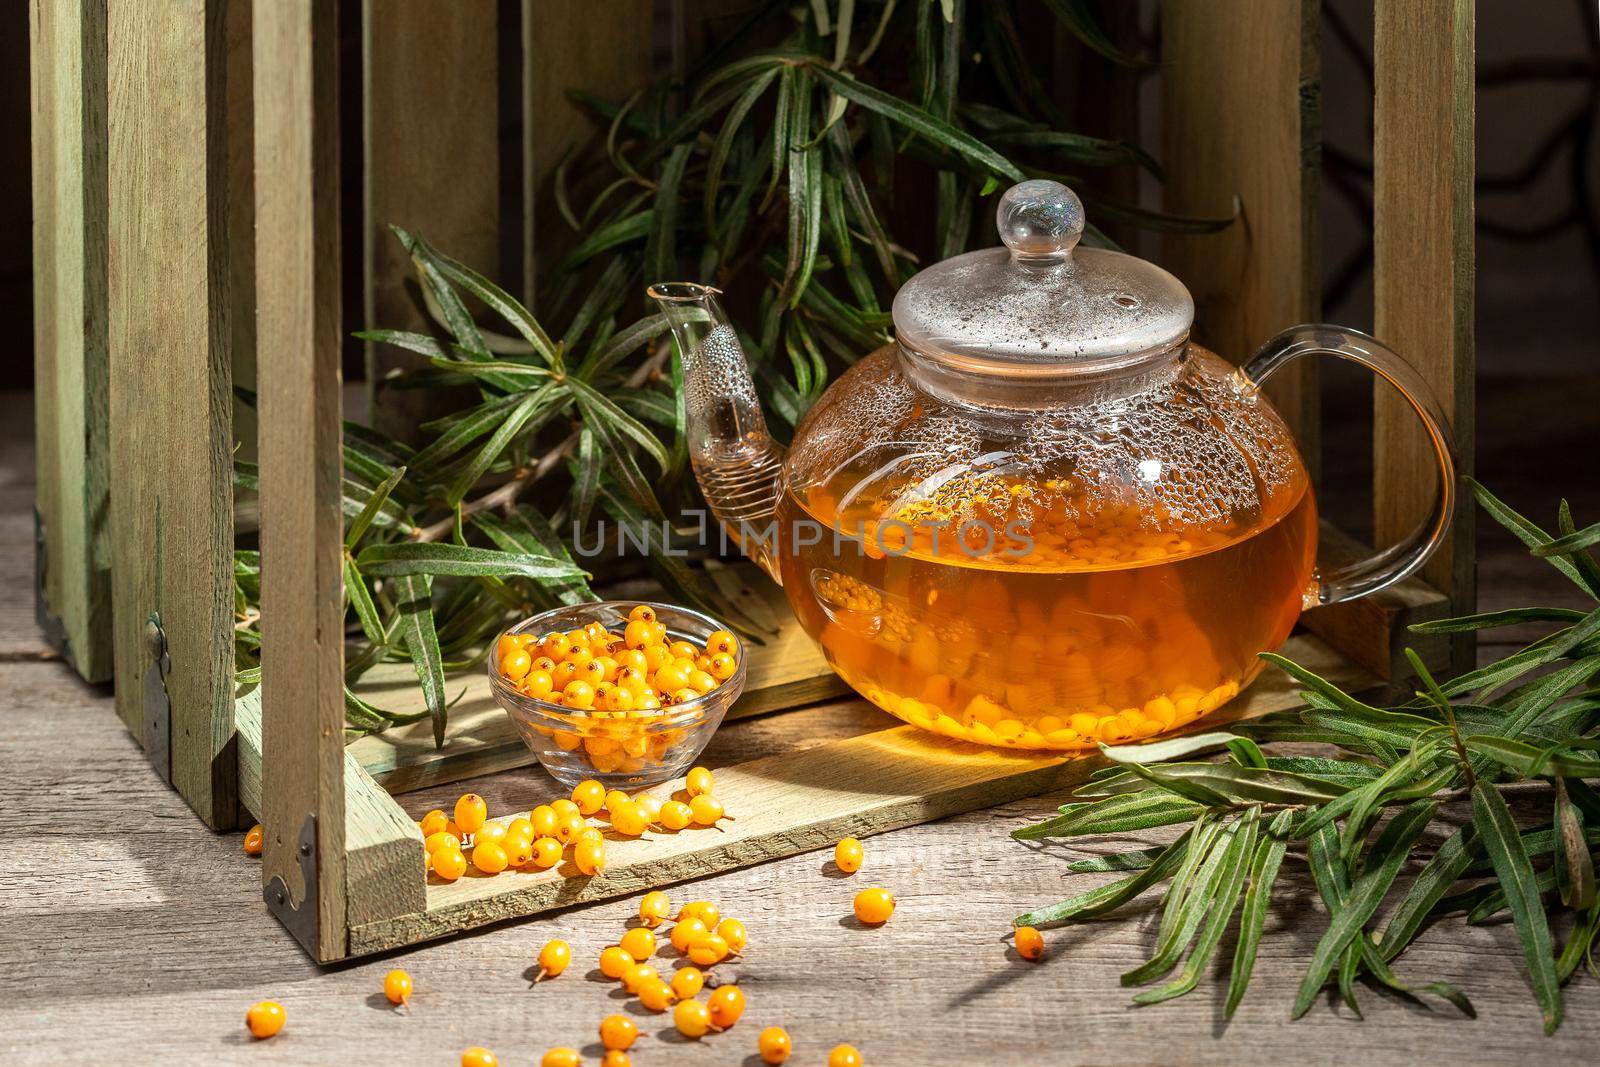 Hot winter drink made from Sea Buckthorn berries in a glass kettle on wooden table